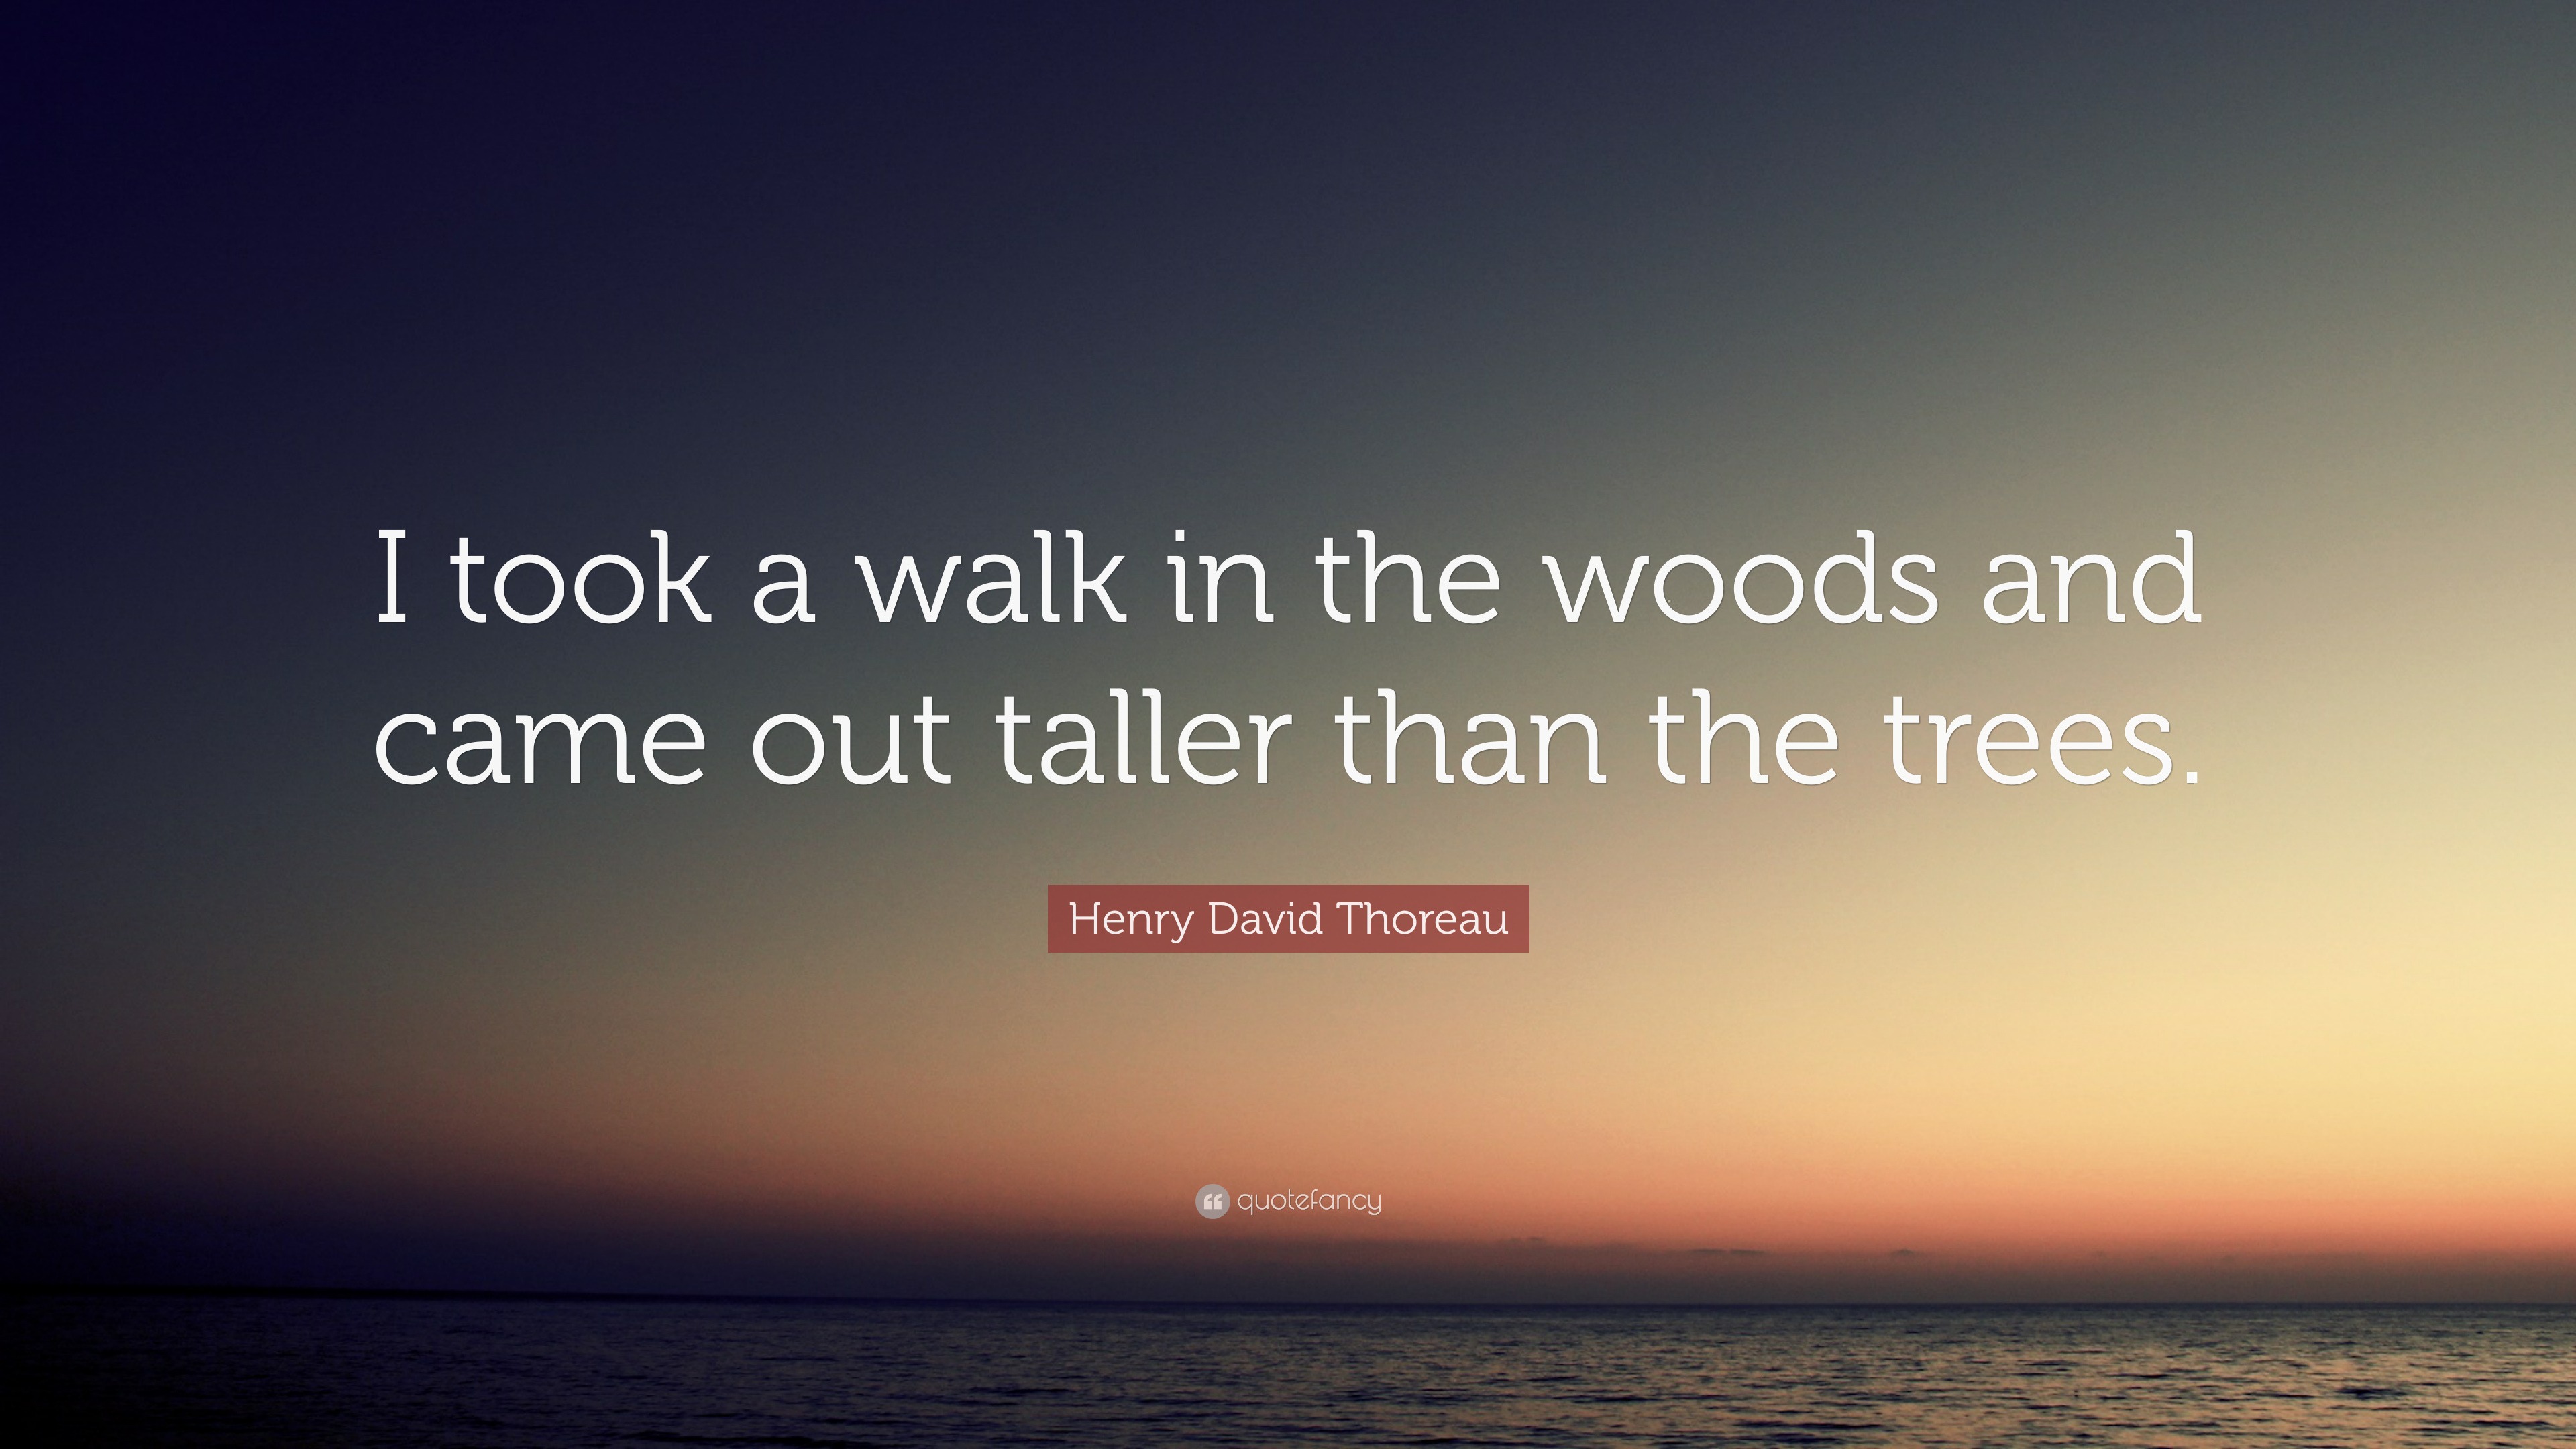 henry david thoreau i took a walk in the woods